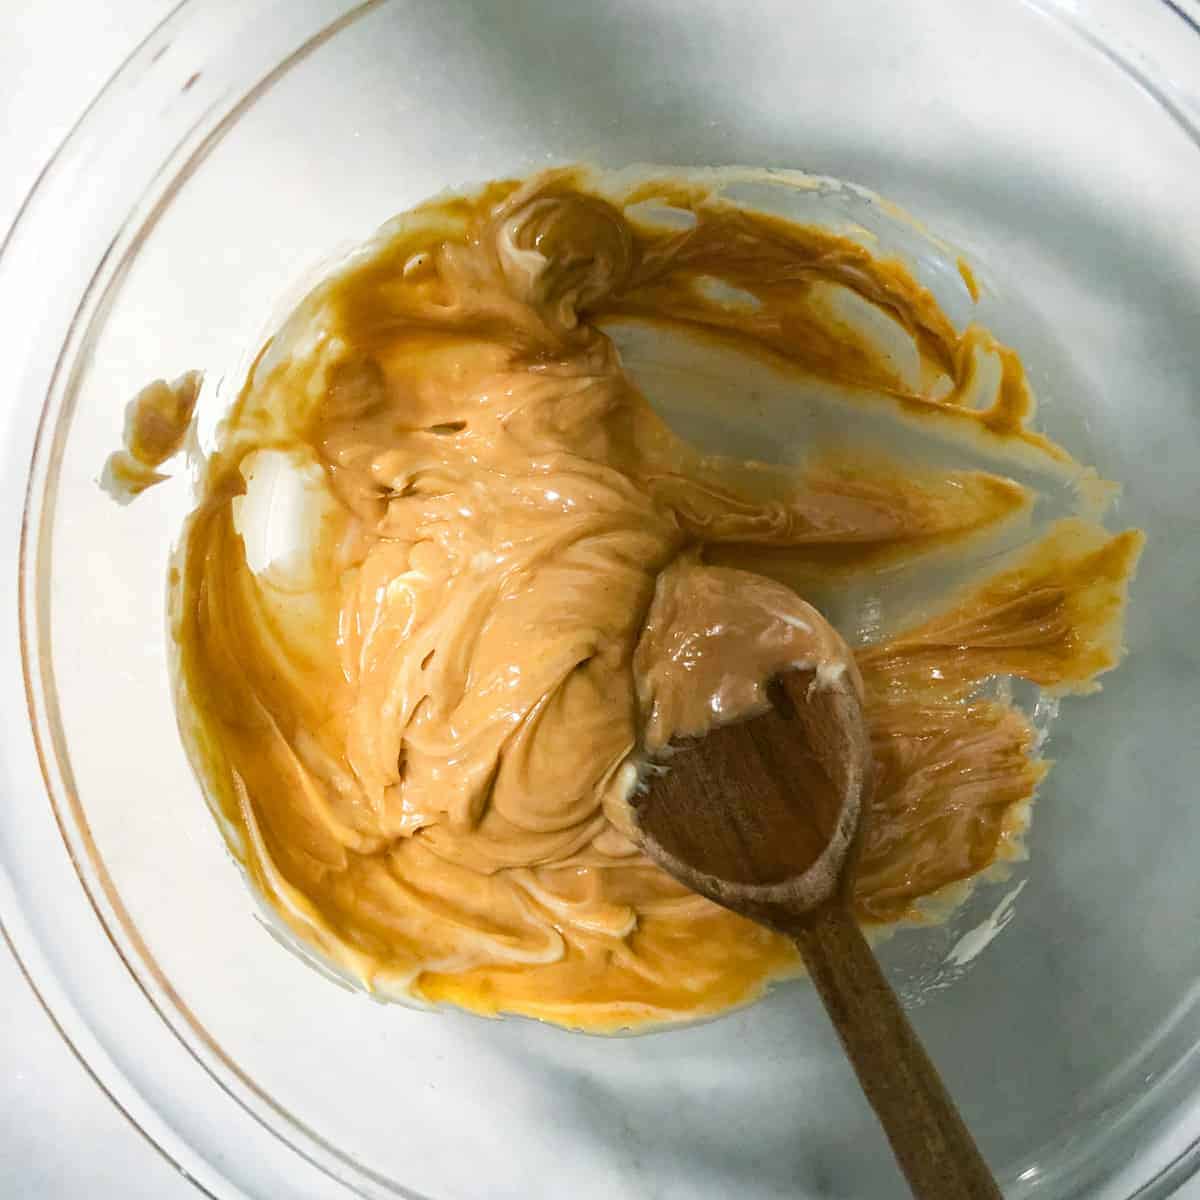 mixed peanut butter and butter in aclear bowl and wooden spoon.